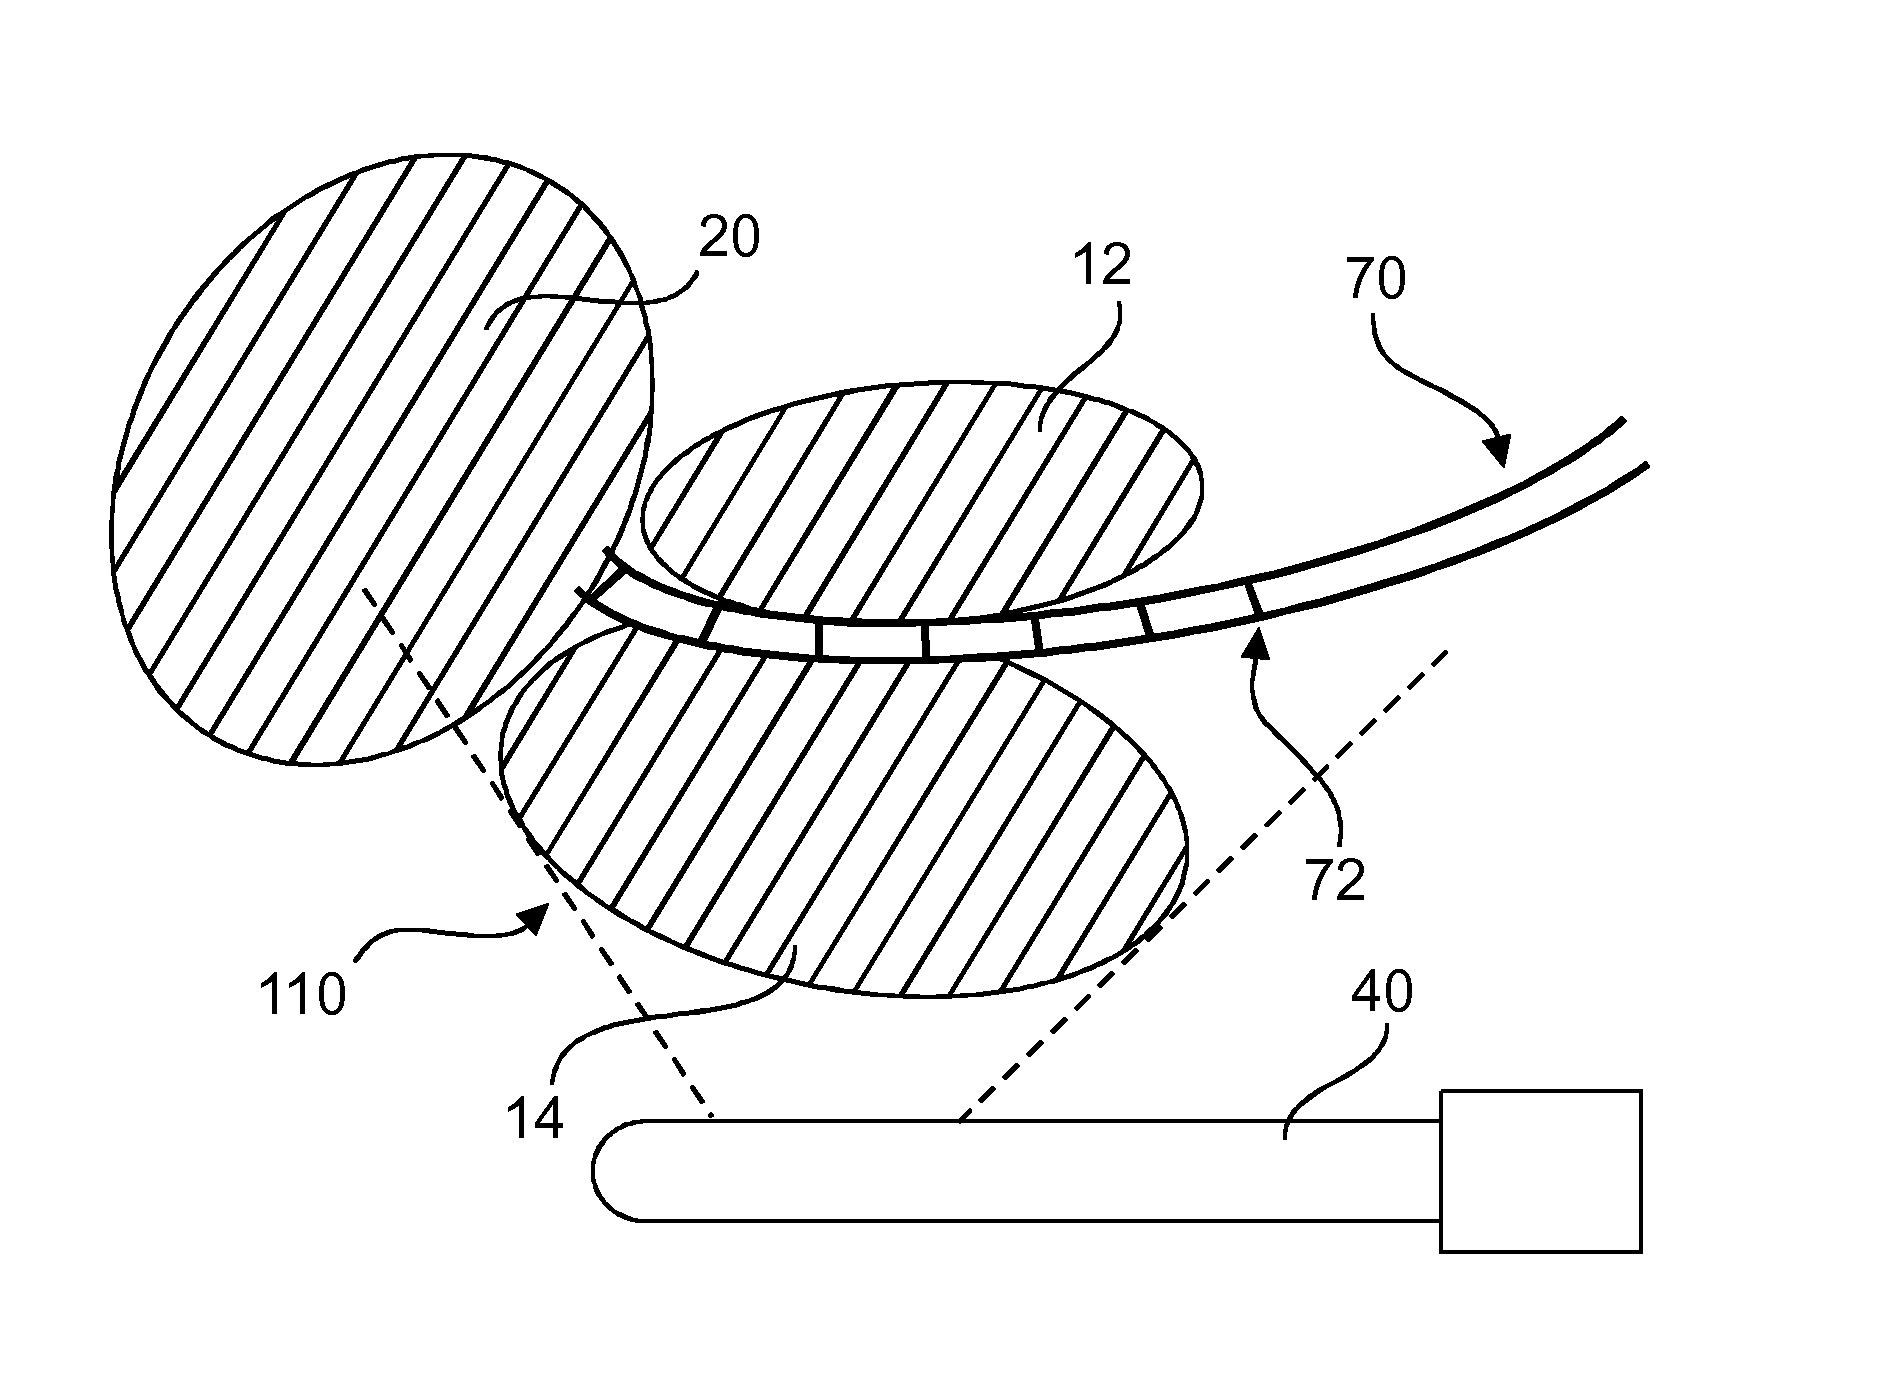 Method and system for localizing body structures